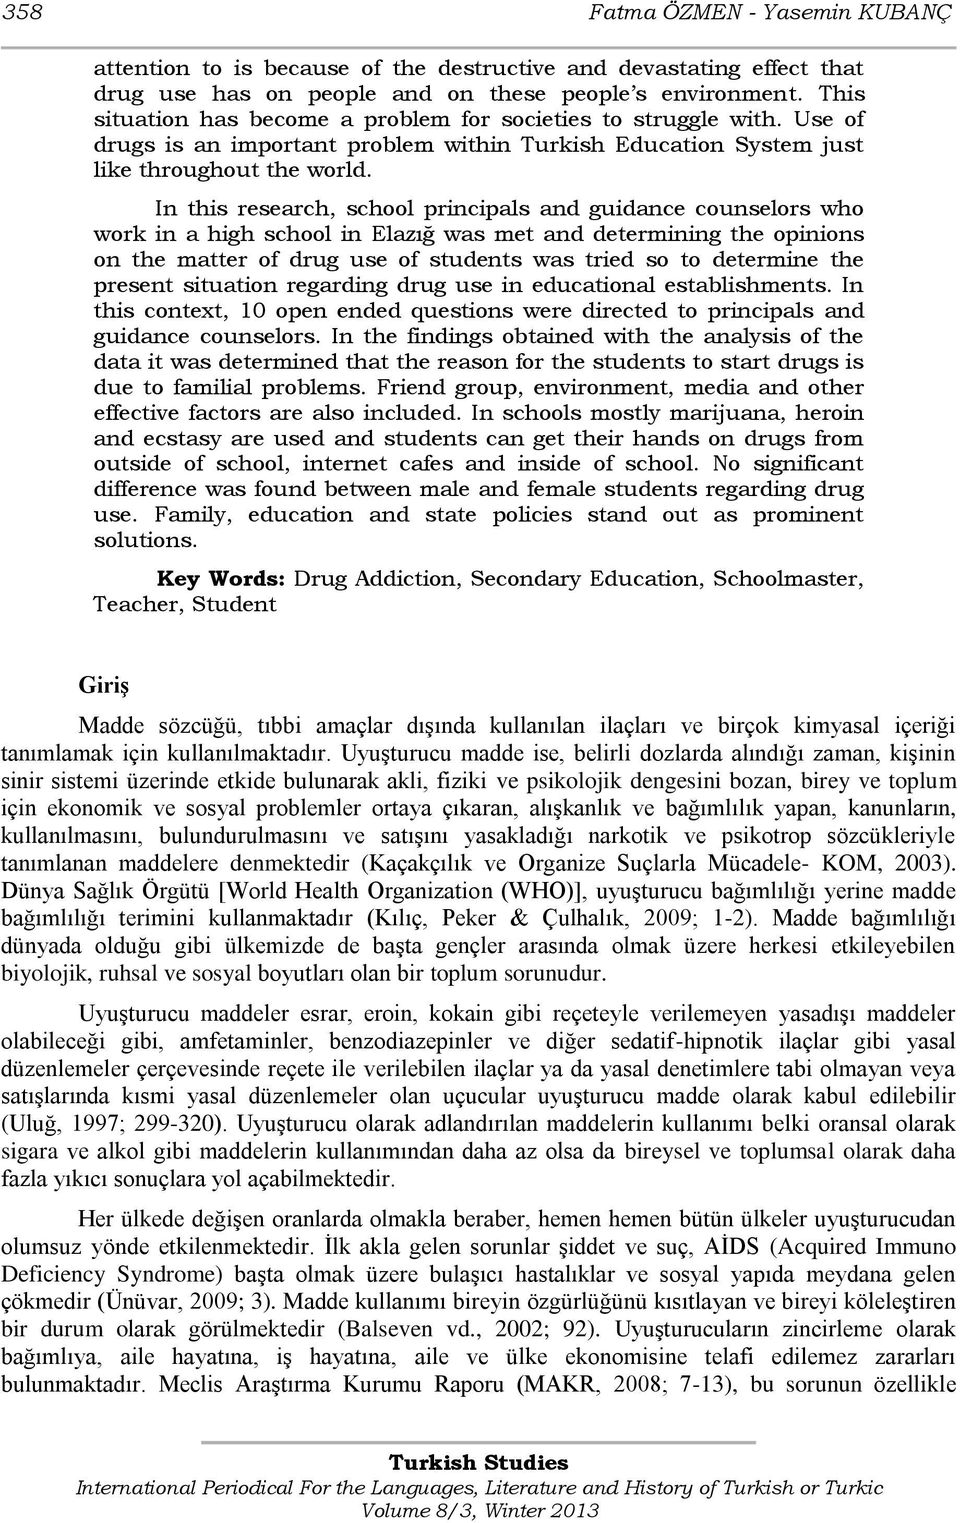 In this research, school principals and guidance counselors who work in a high school in Elazığ was met and determining the opinions on the matter of drug use of students was tried so to determine